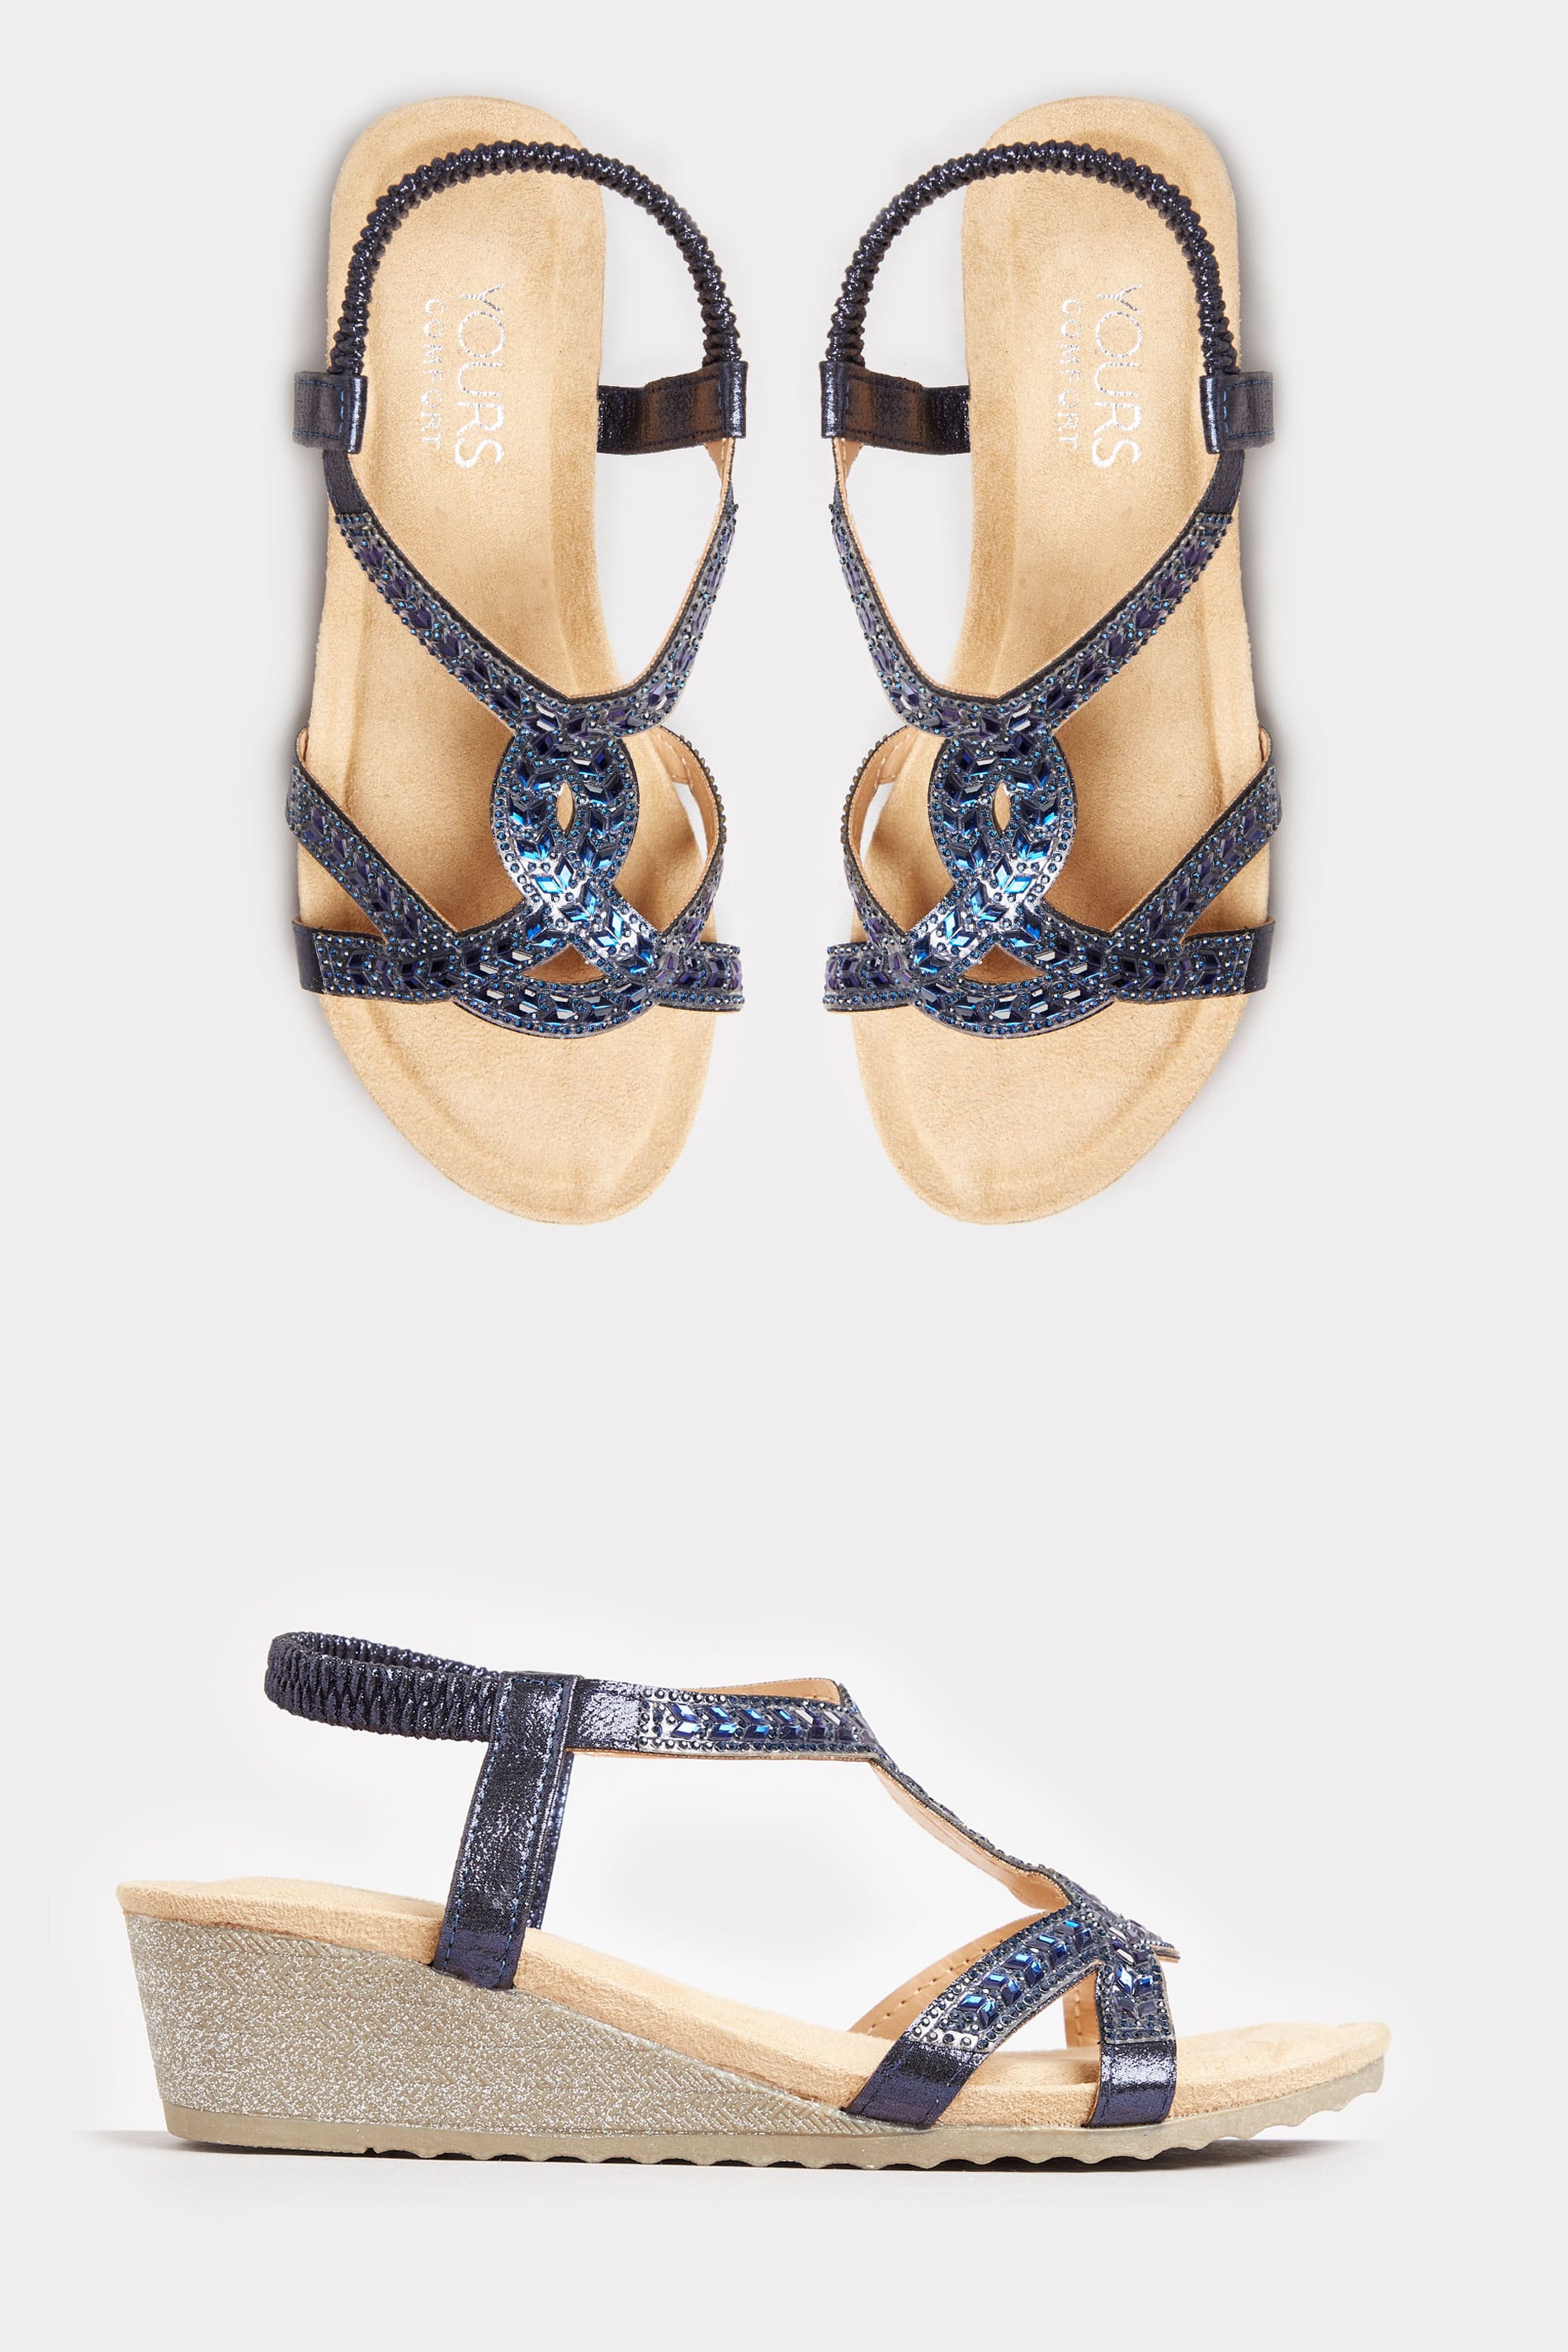 double wide sandals